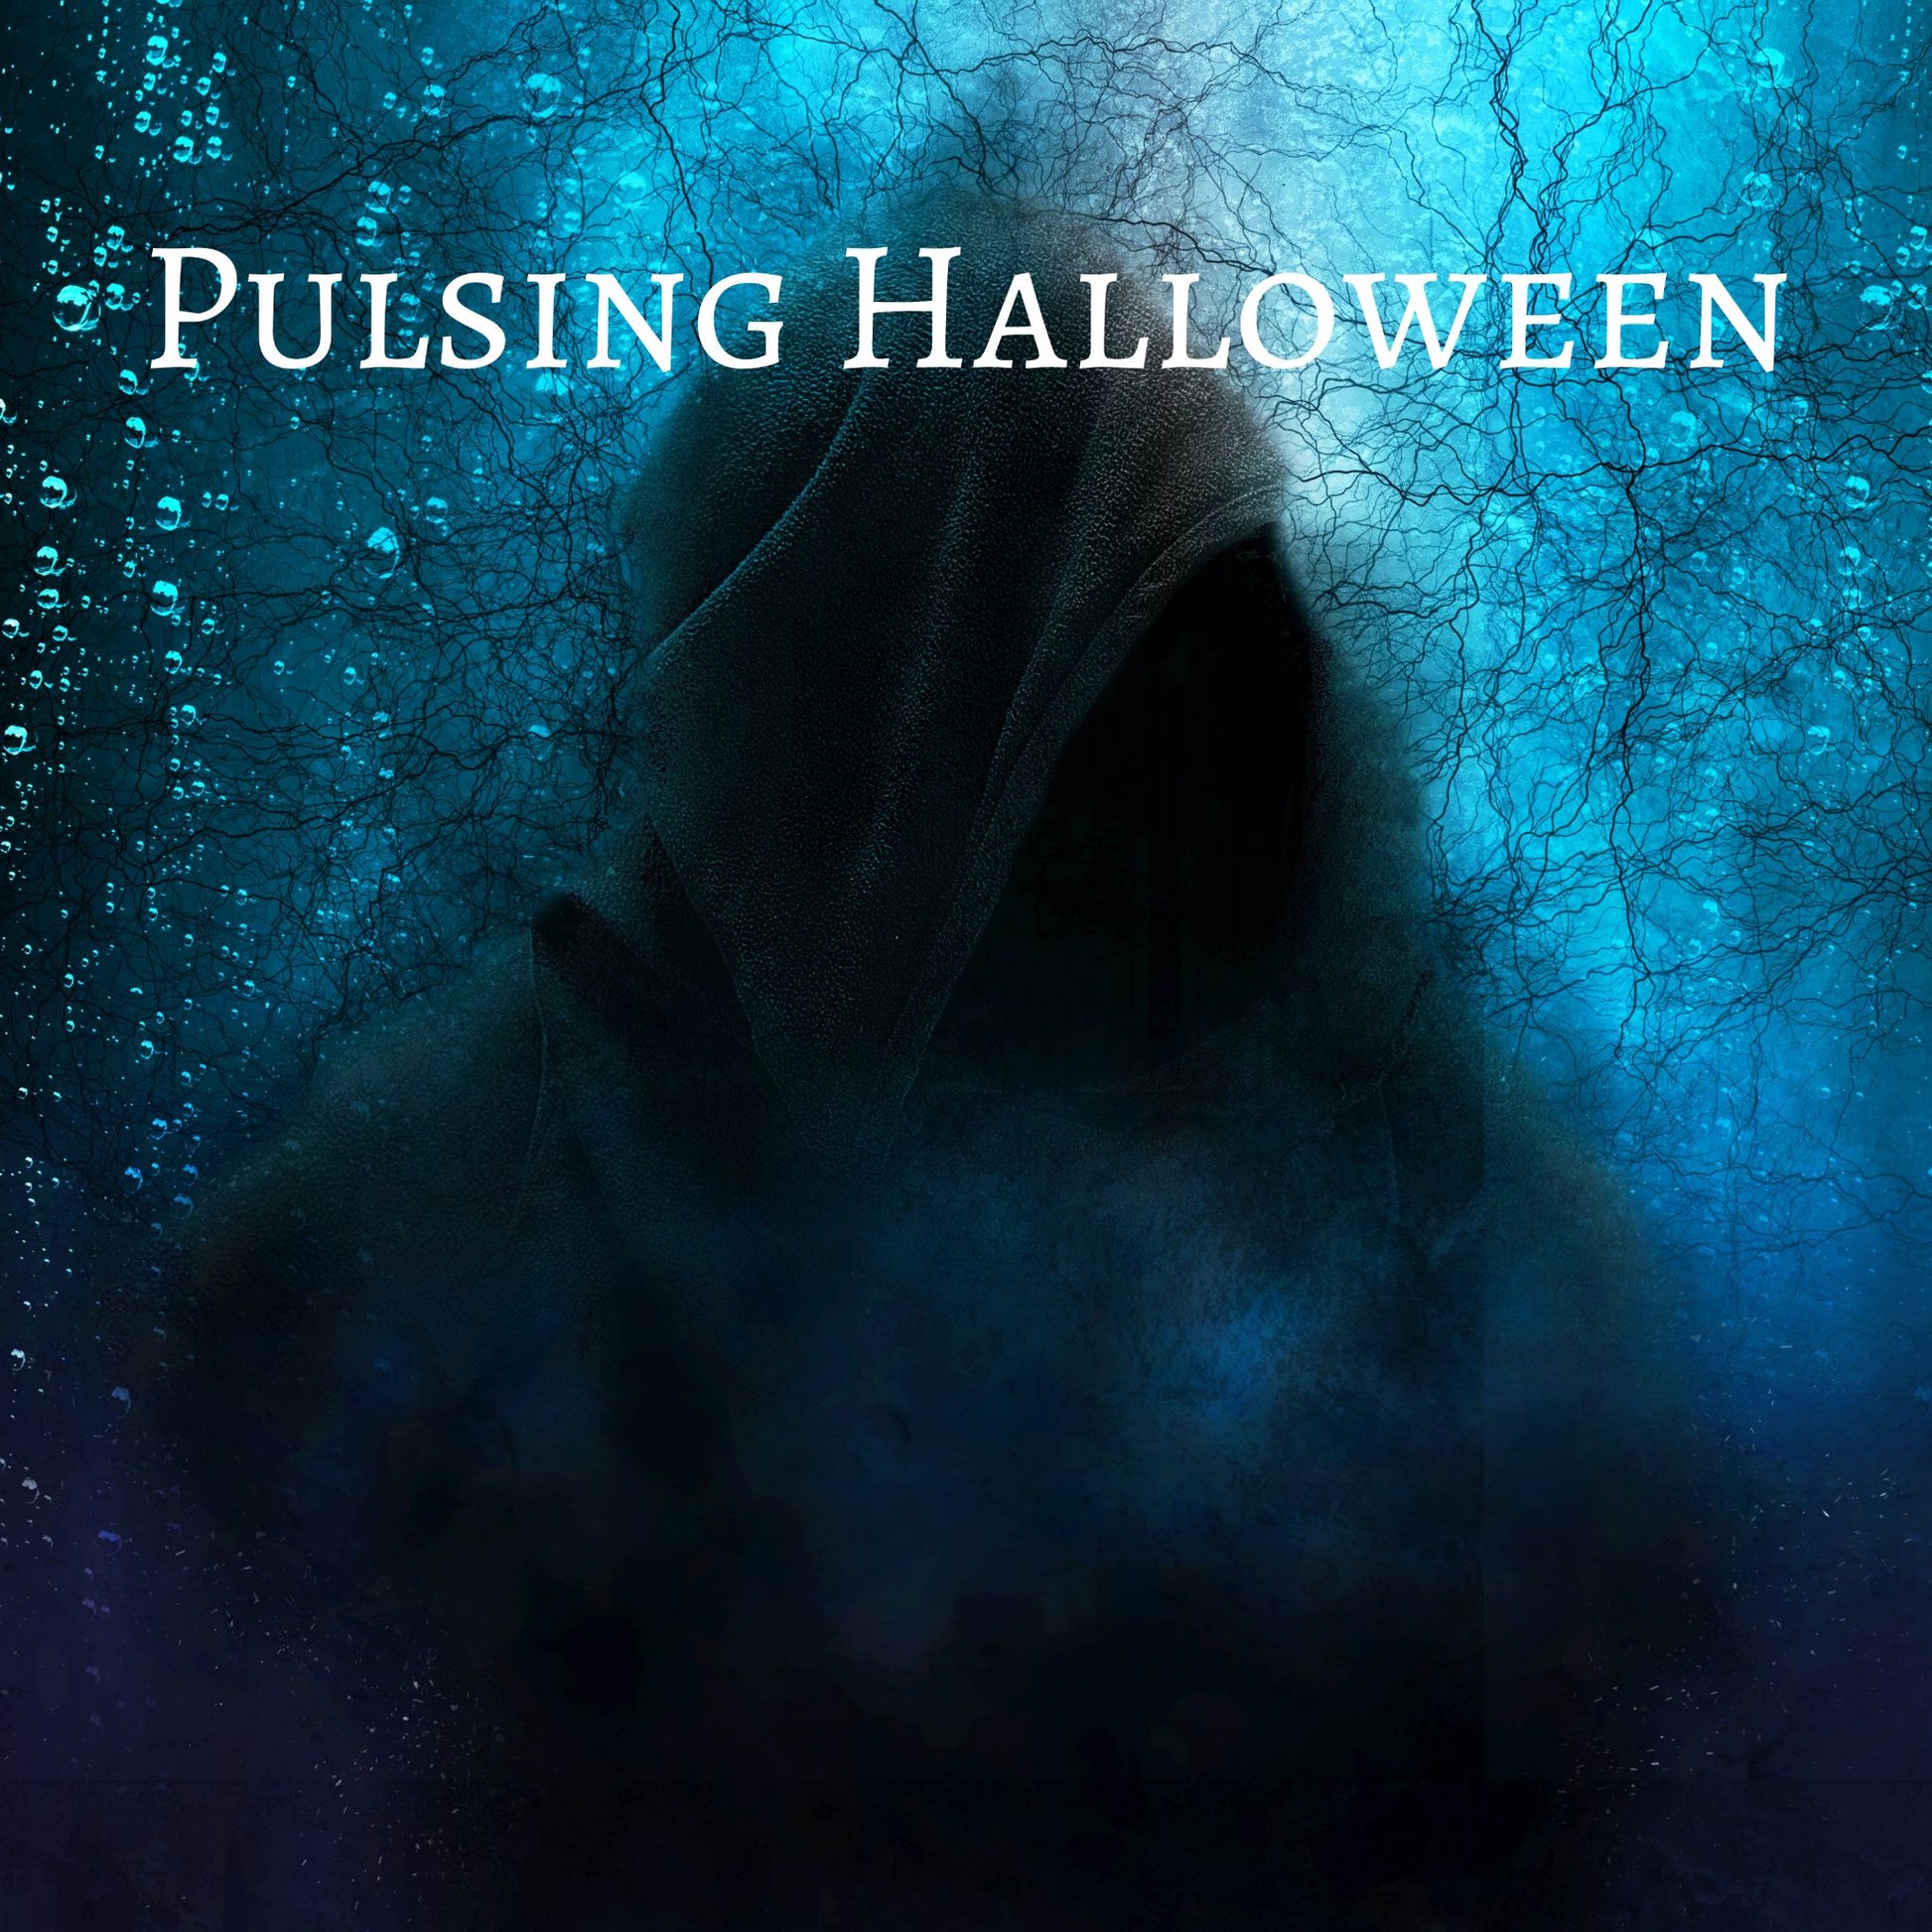 CD Cover of song Pulsing Halloween